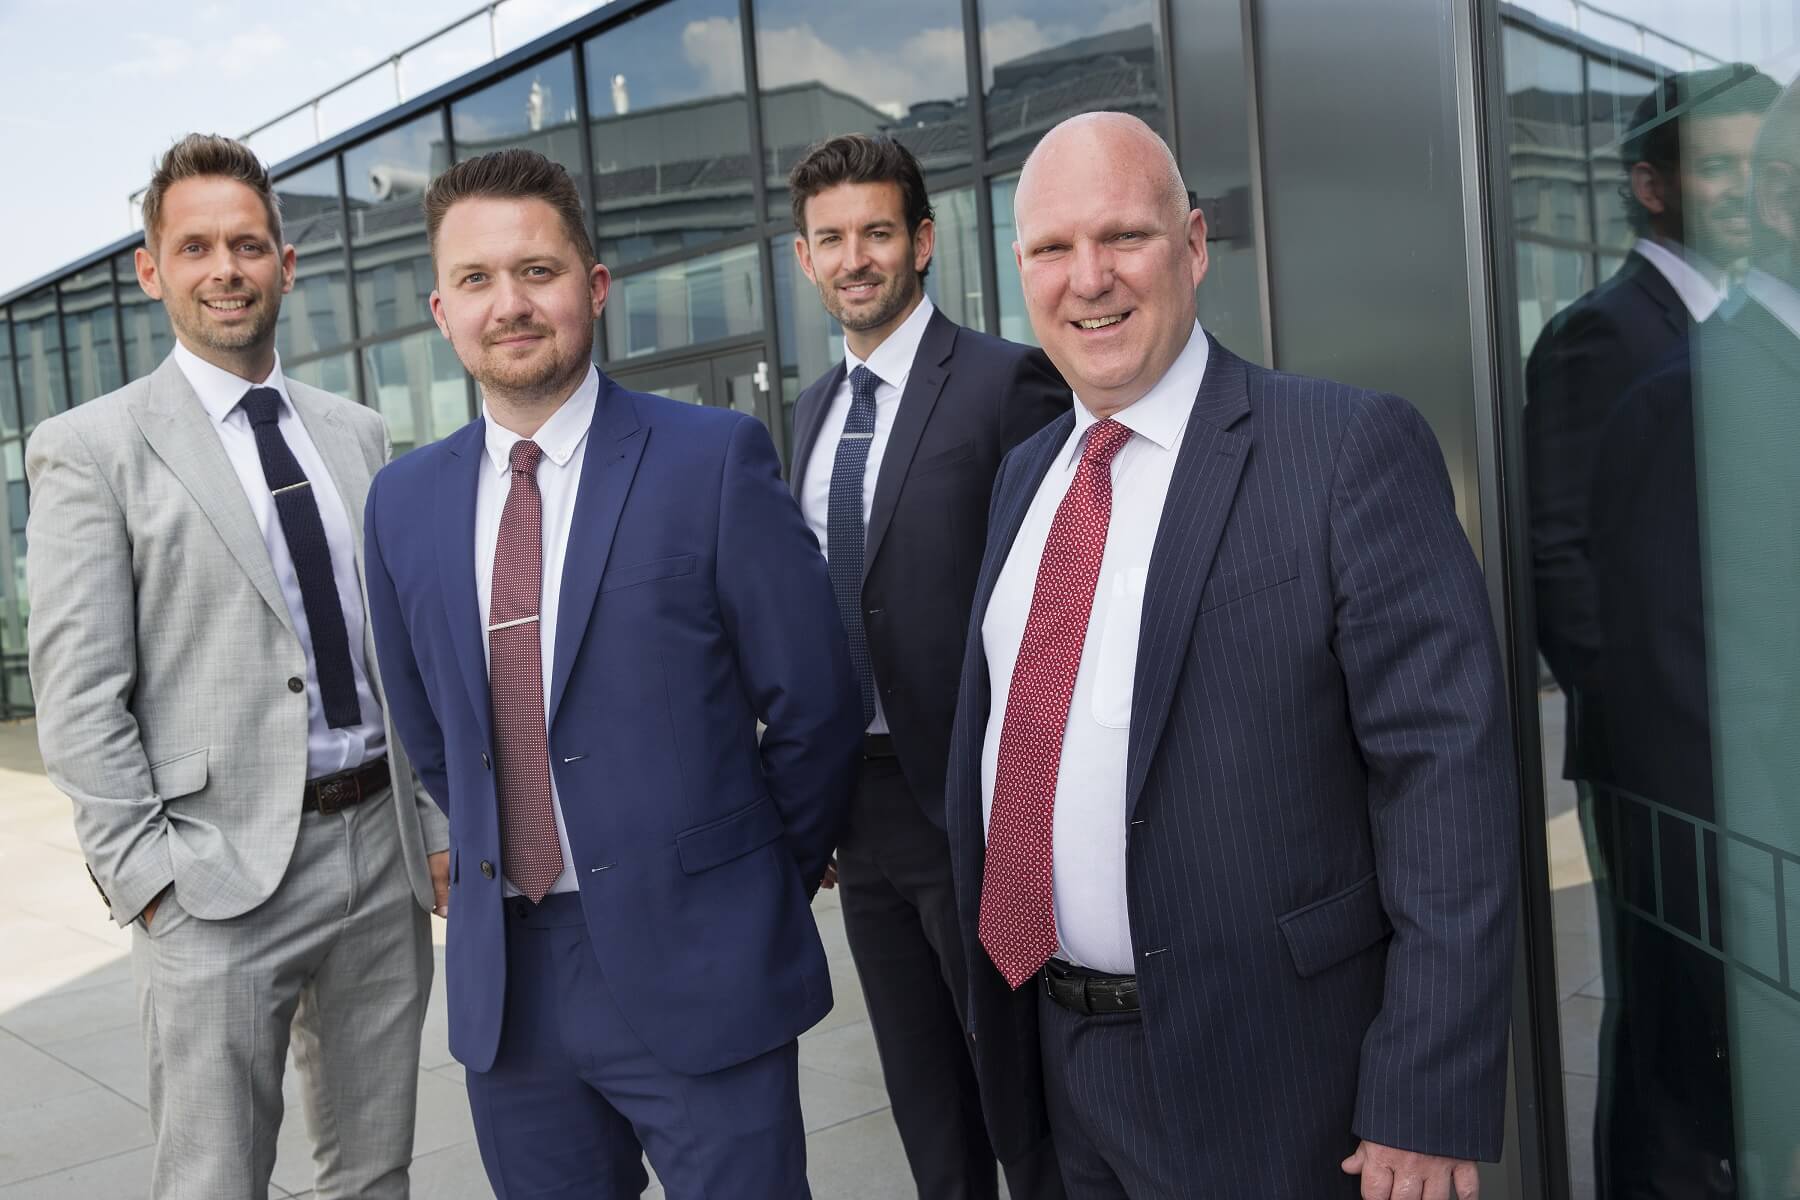 Project and Cost Management: (From left) James Gundy, Alex Leighton, Alex McCusker and Phil Jardine. Pic credit Huw John, Cardiff.